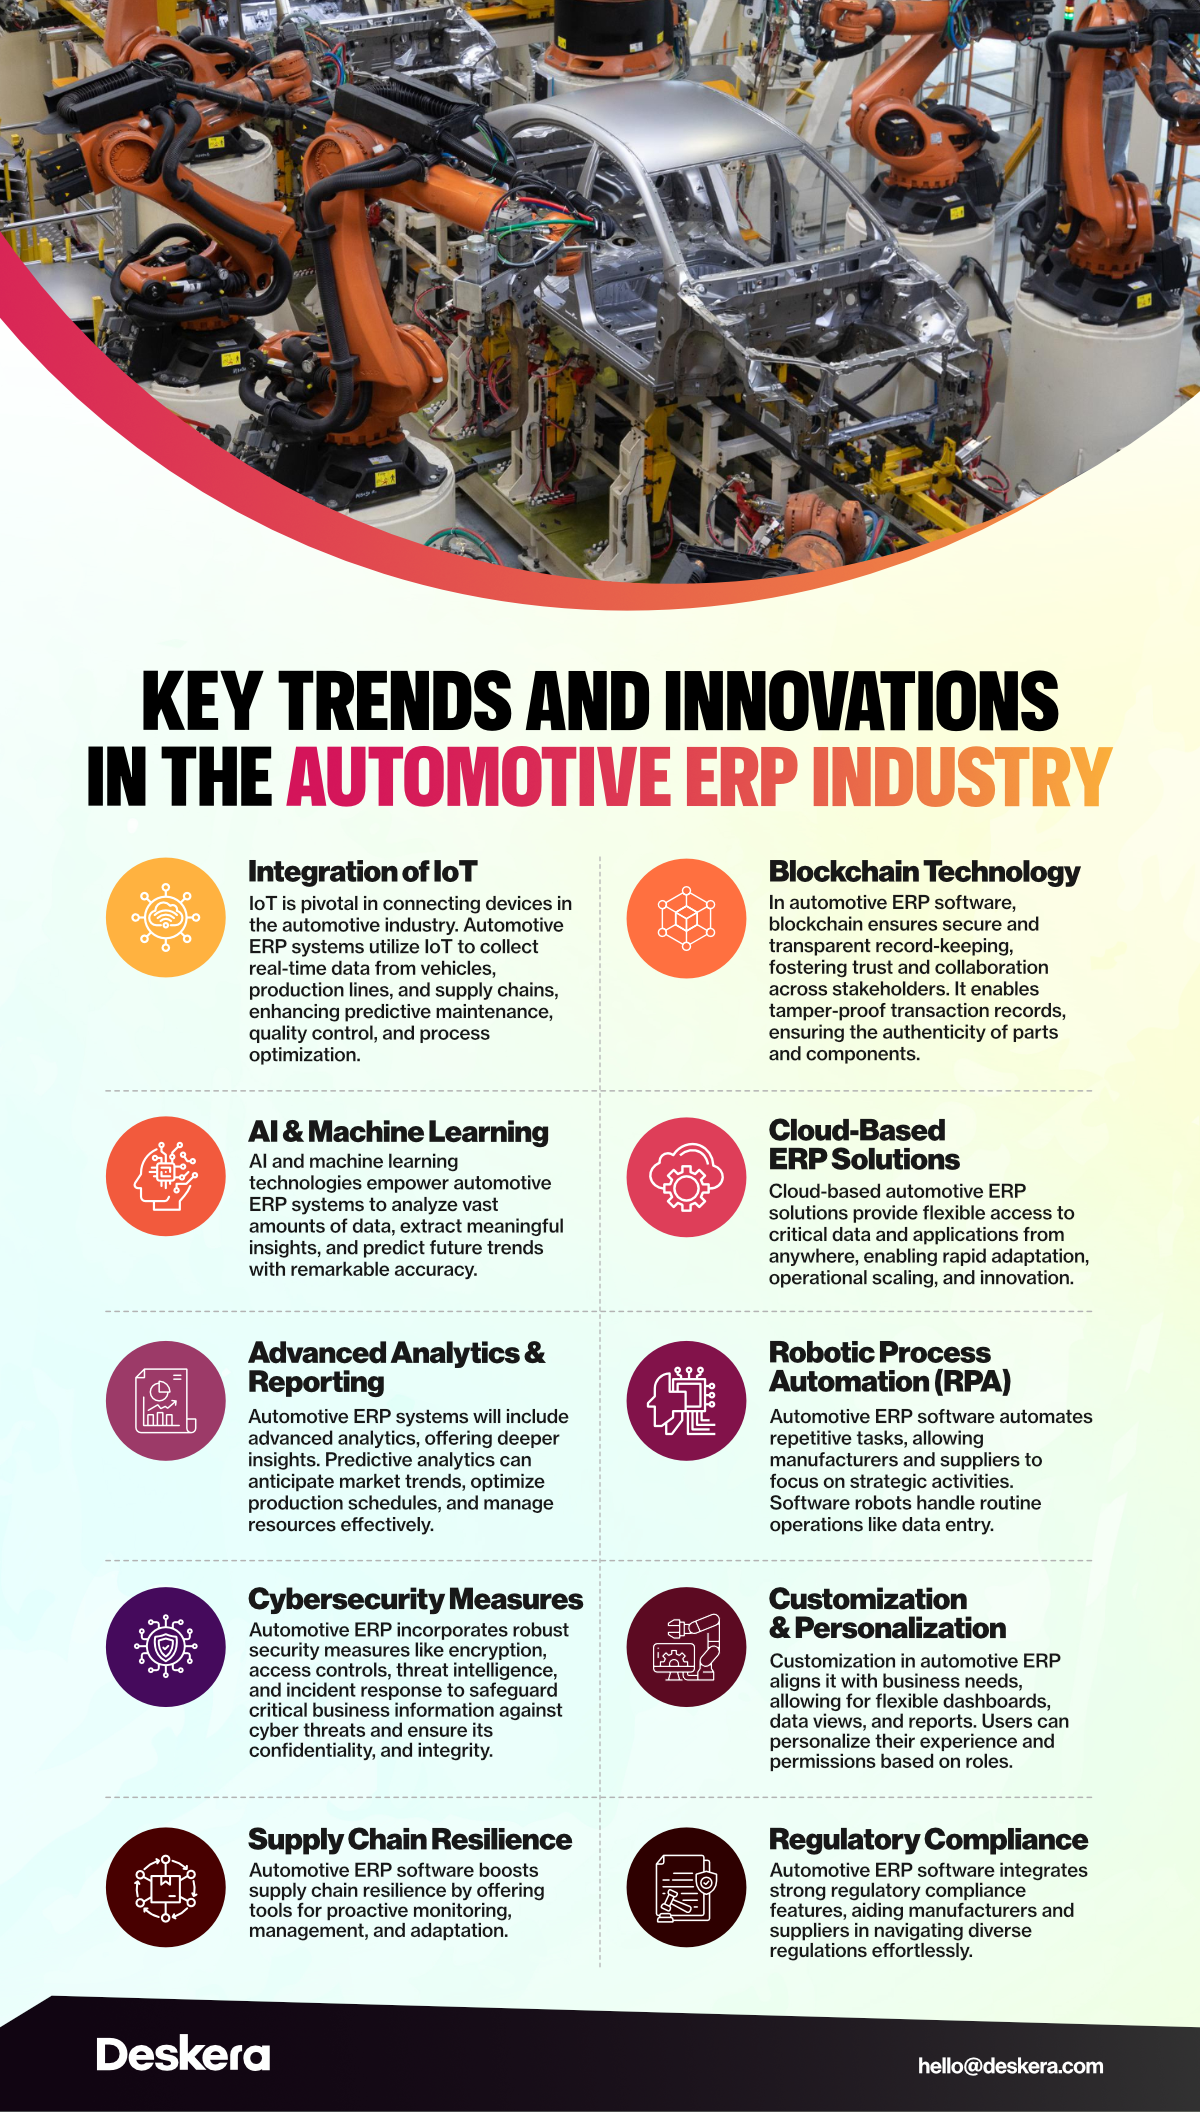 Key Trends and Innovations in the Automotive ERP Industry like IoT, Blockchain Technology, Robotic Process Automation, AI and Machine Learning, Cloud-Based Systems, and many more